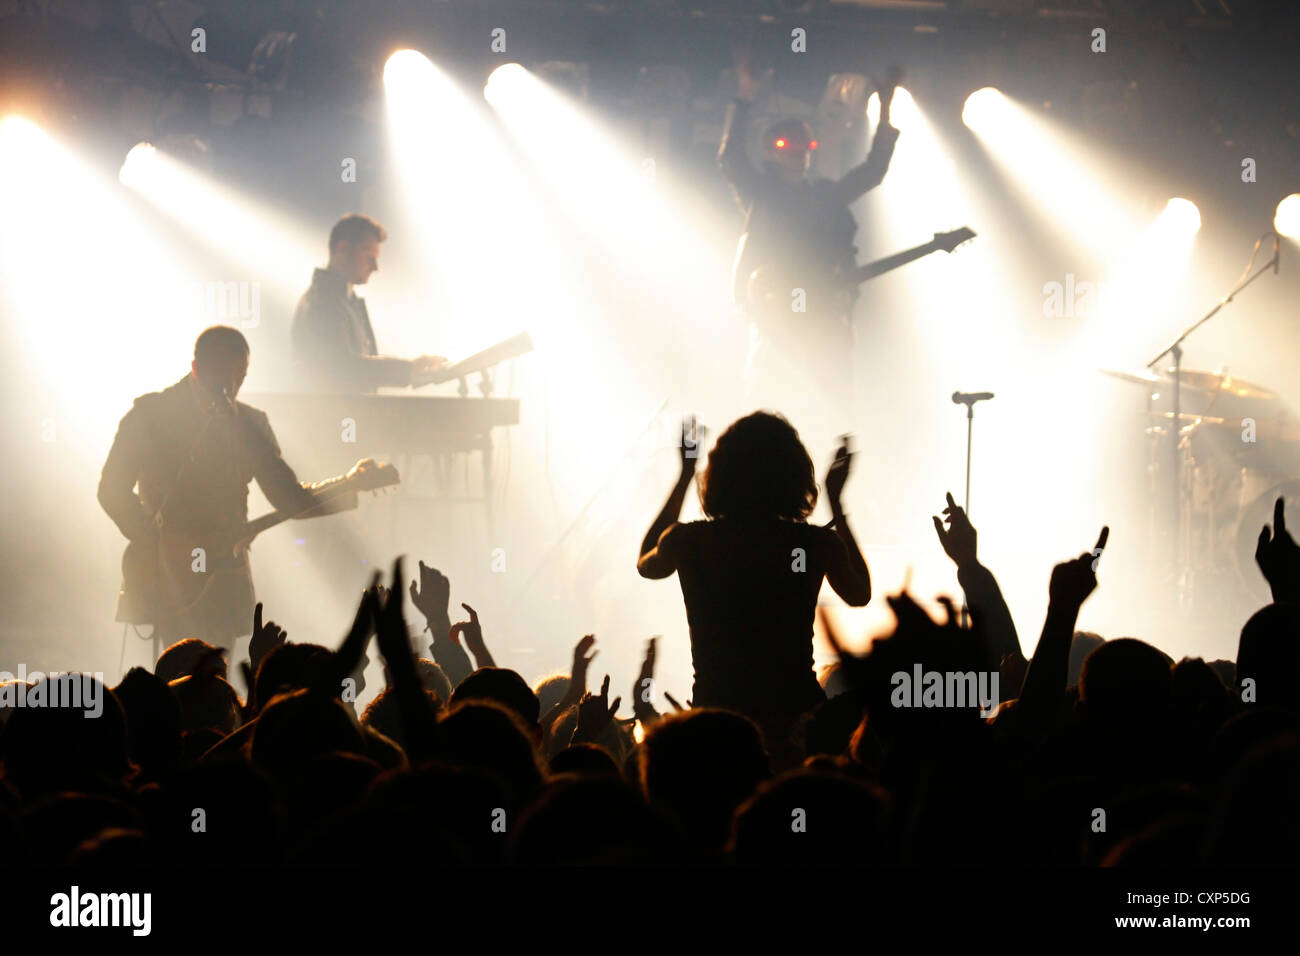 Silhouetted spectators / crowd and ambiance during live rock concert with rockers on stage illuminated by spotlights Stock Photo